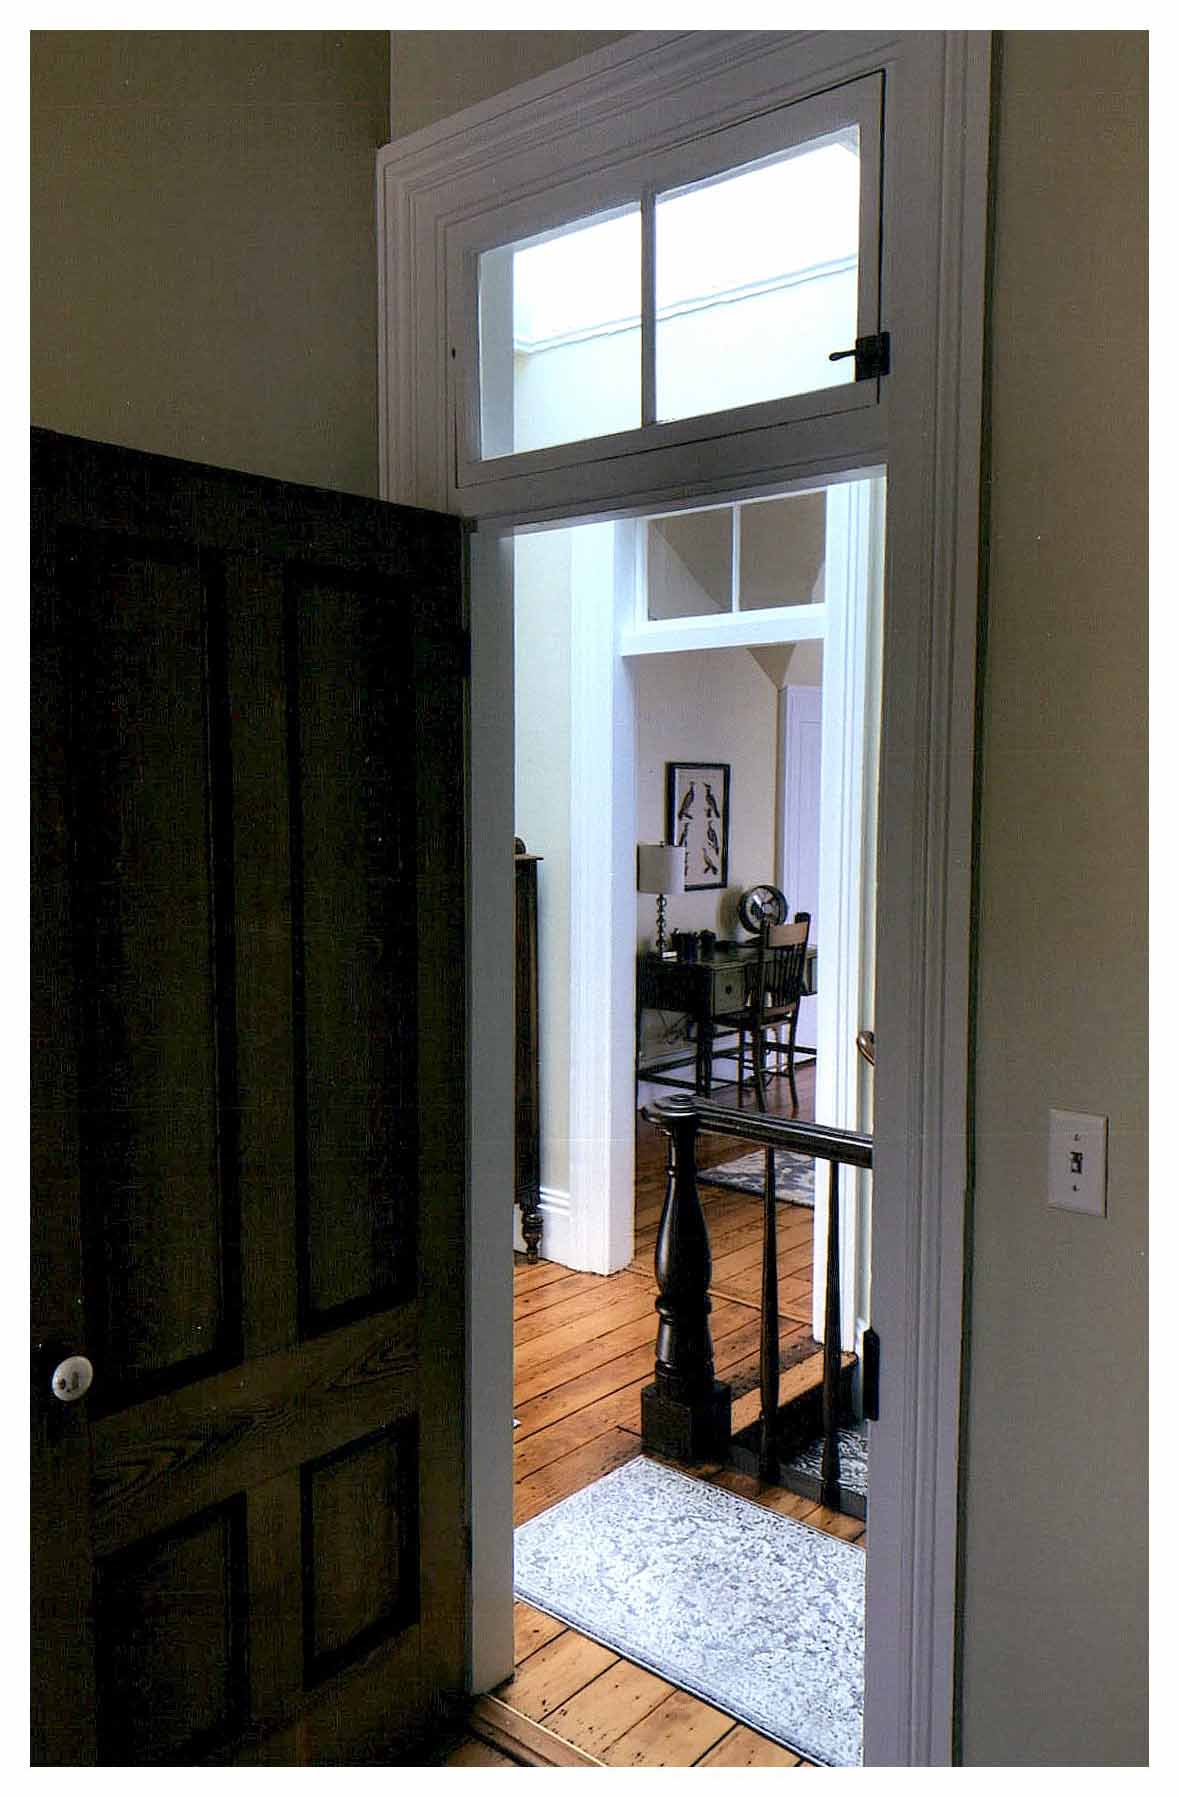 After: close-up of bedroom door and transom with view of hallway and bedroom beyond. Light colored surfaces and large skylight brighten the entire second floor.